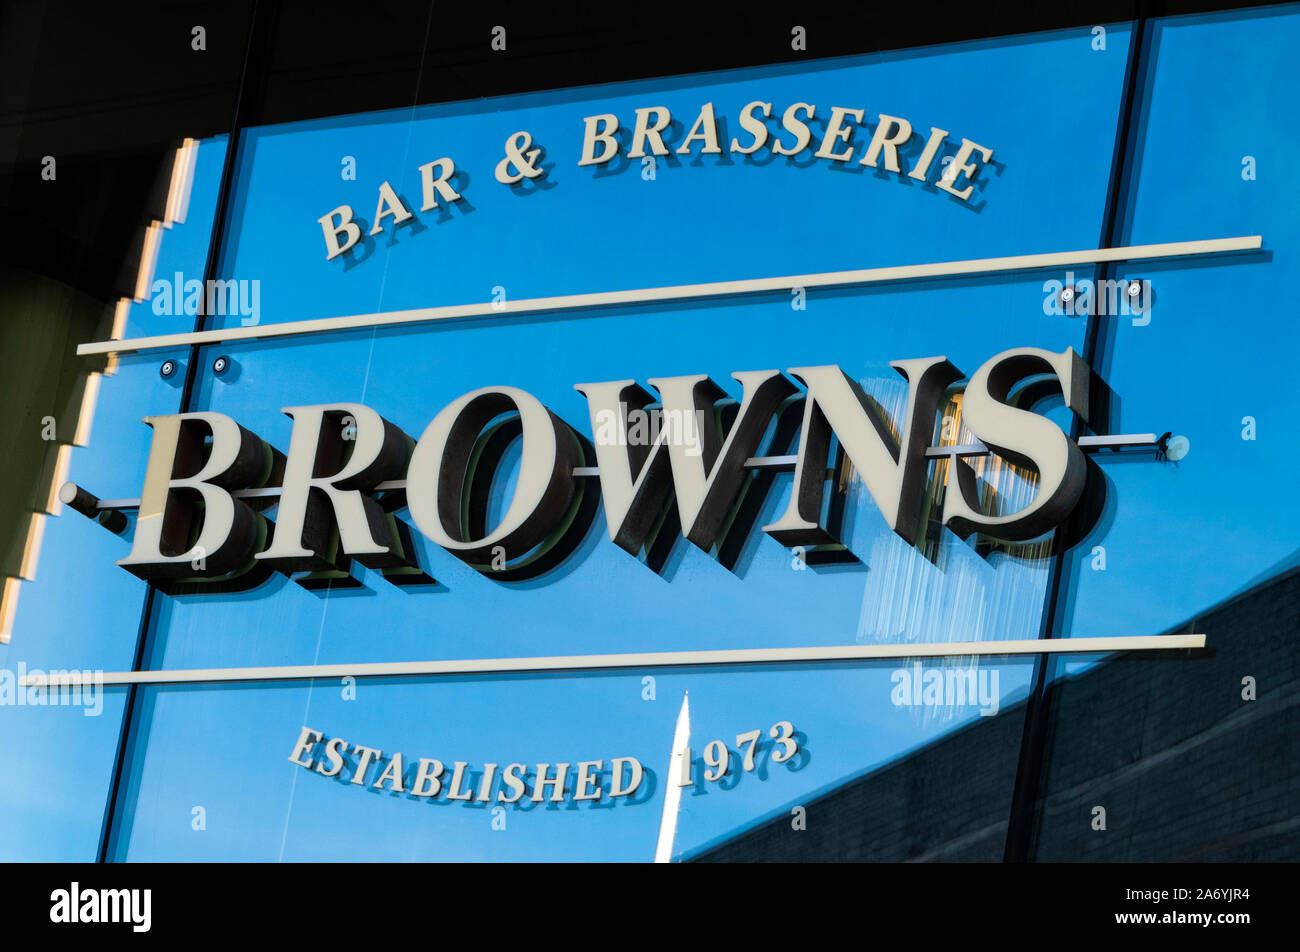 Browns Bar & Brasserie in Liverpool Stock Photo